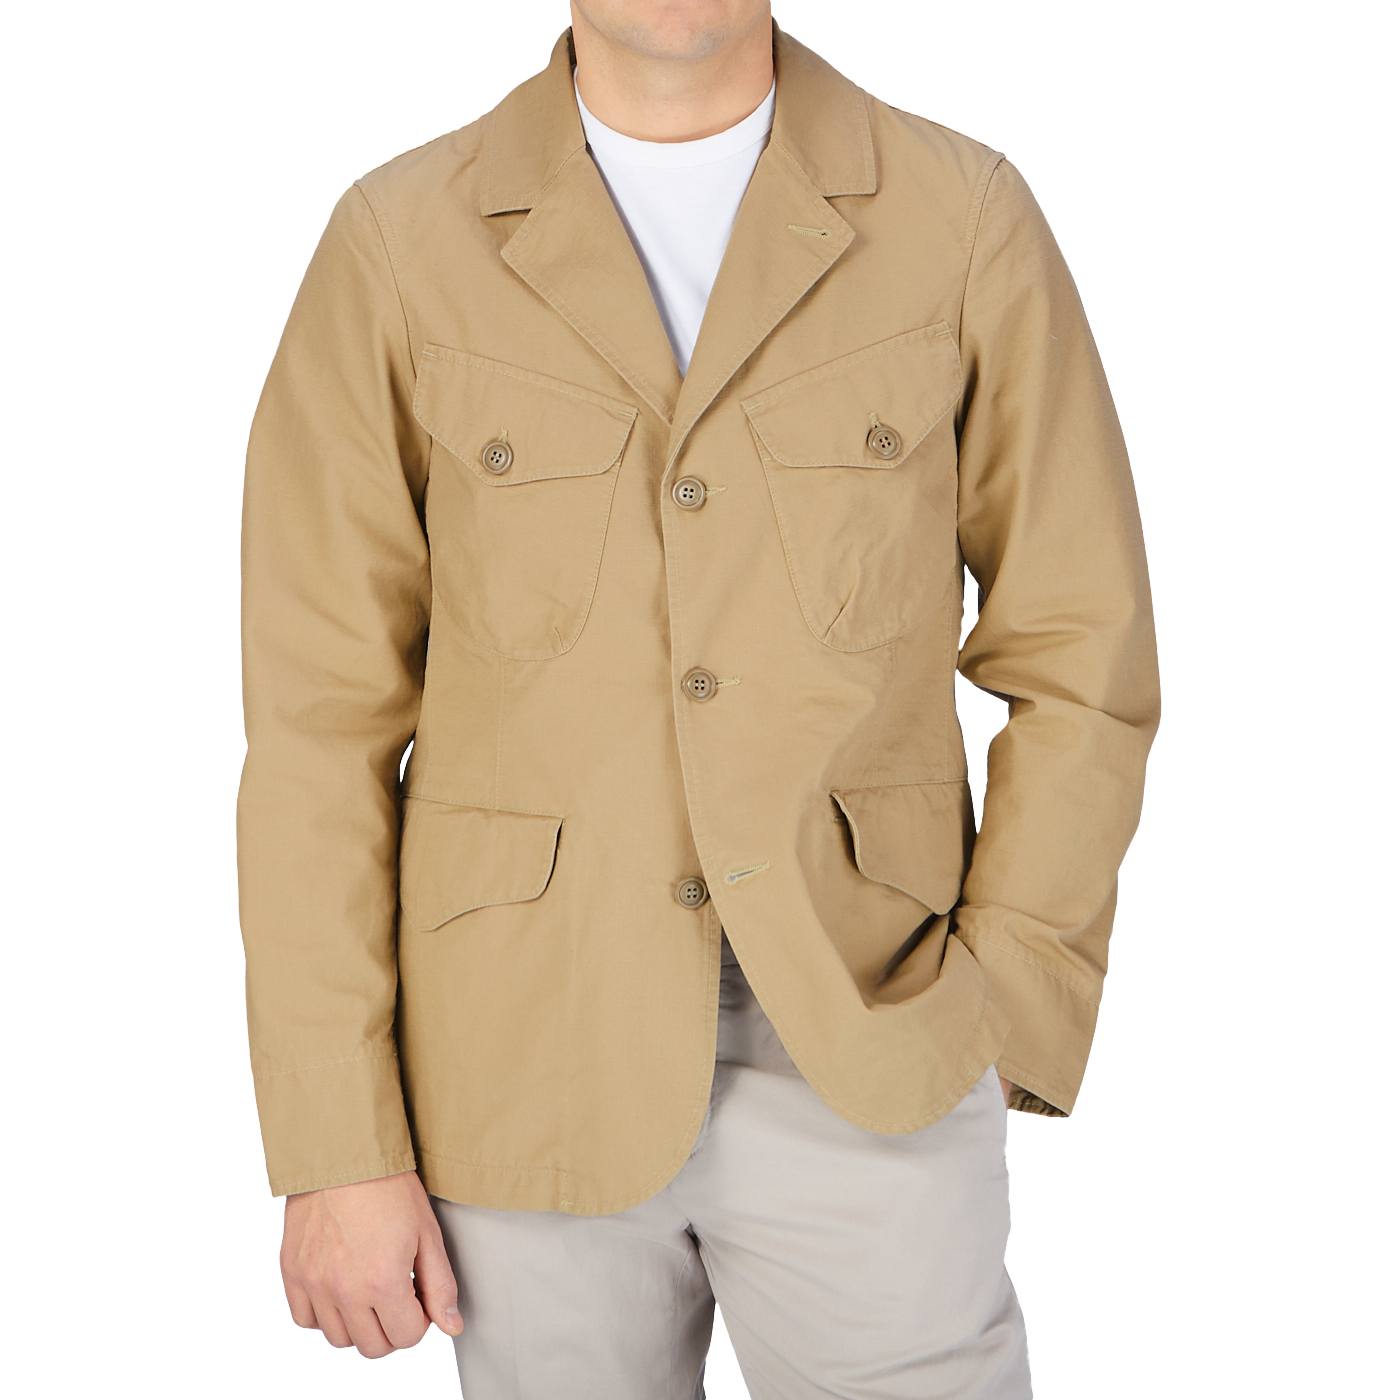 The man is wearing a Camel Beige Ripstop Cotton Bush Jacket made by Manifattura Ceccarelli.